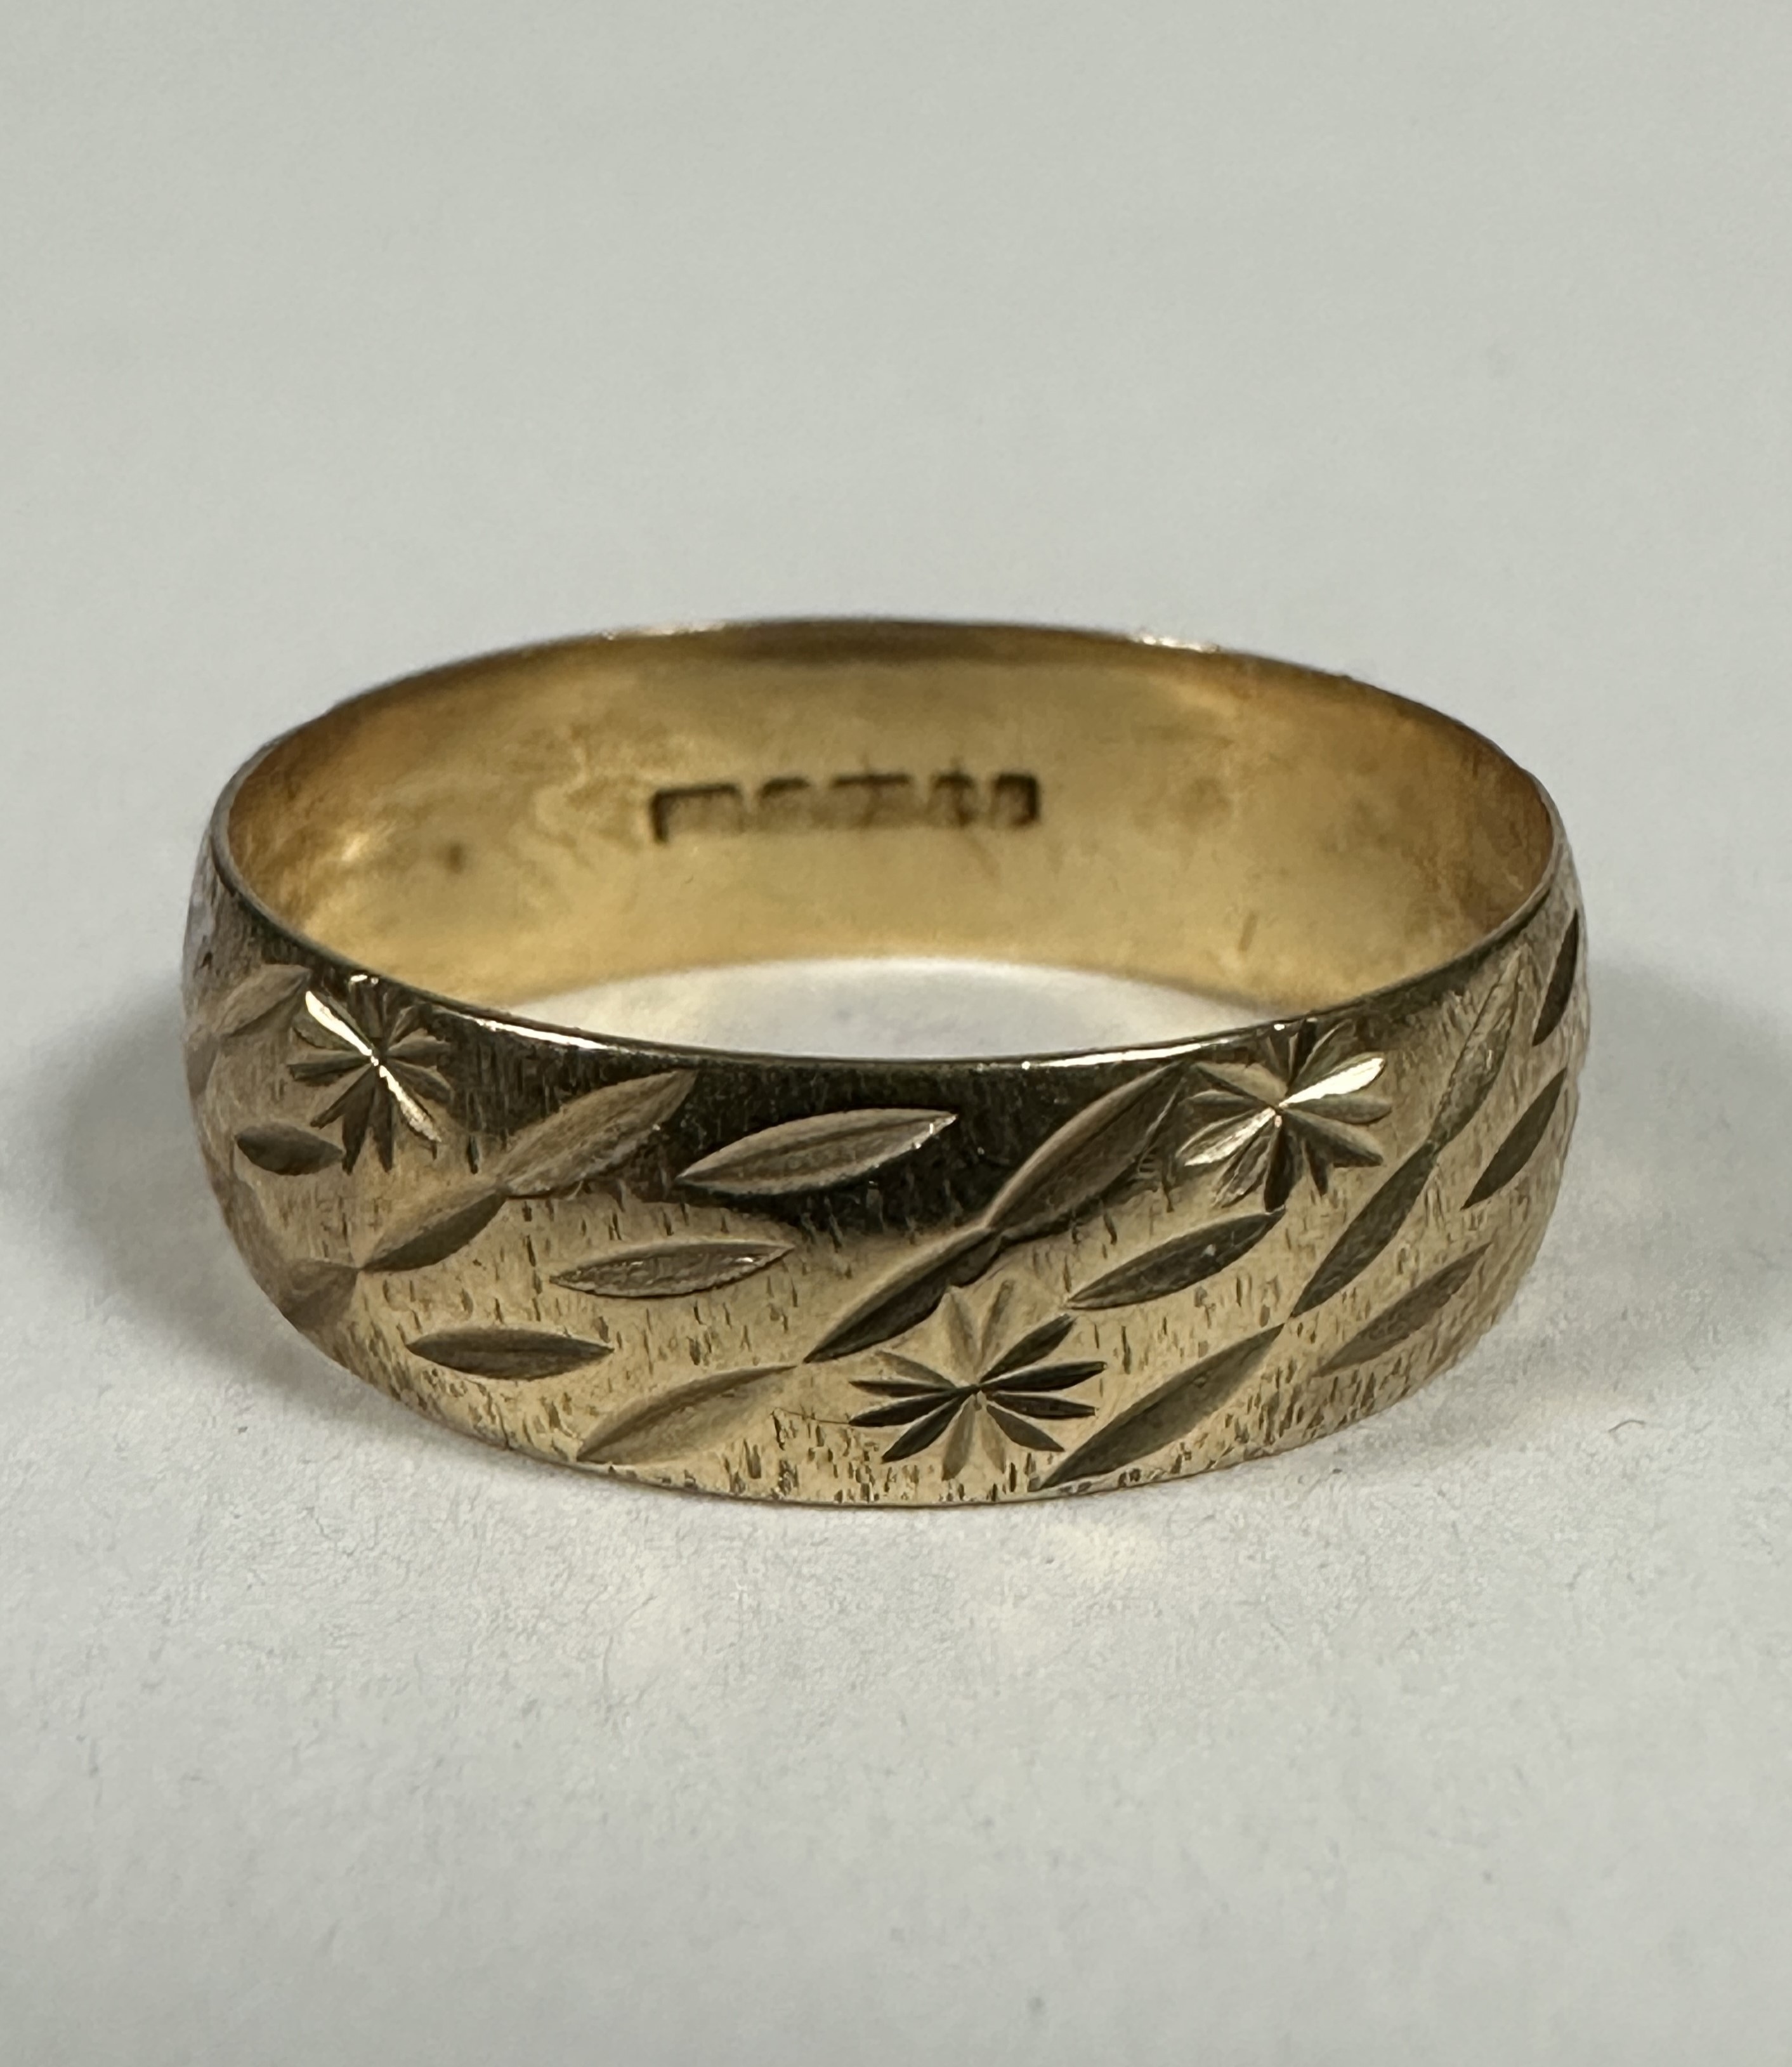 A yellow metal wedding band with internal inscription Martie 3-5-18, O. 4.12g